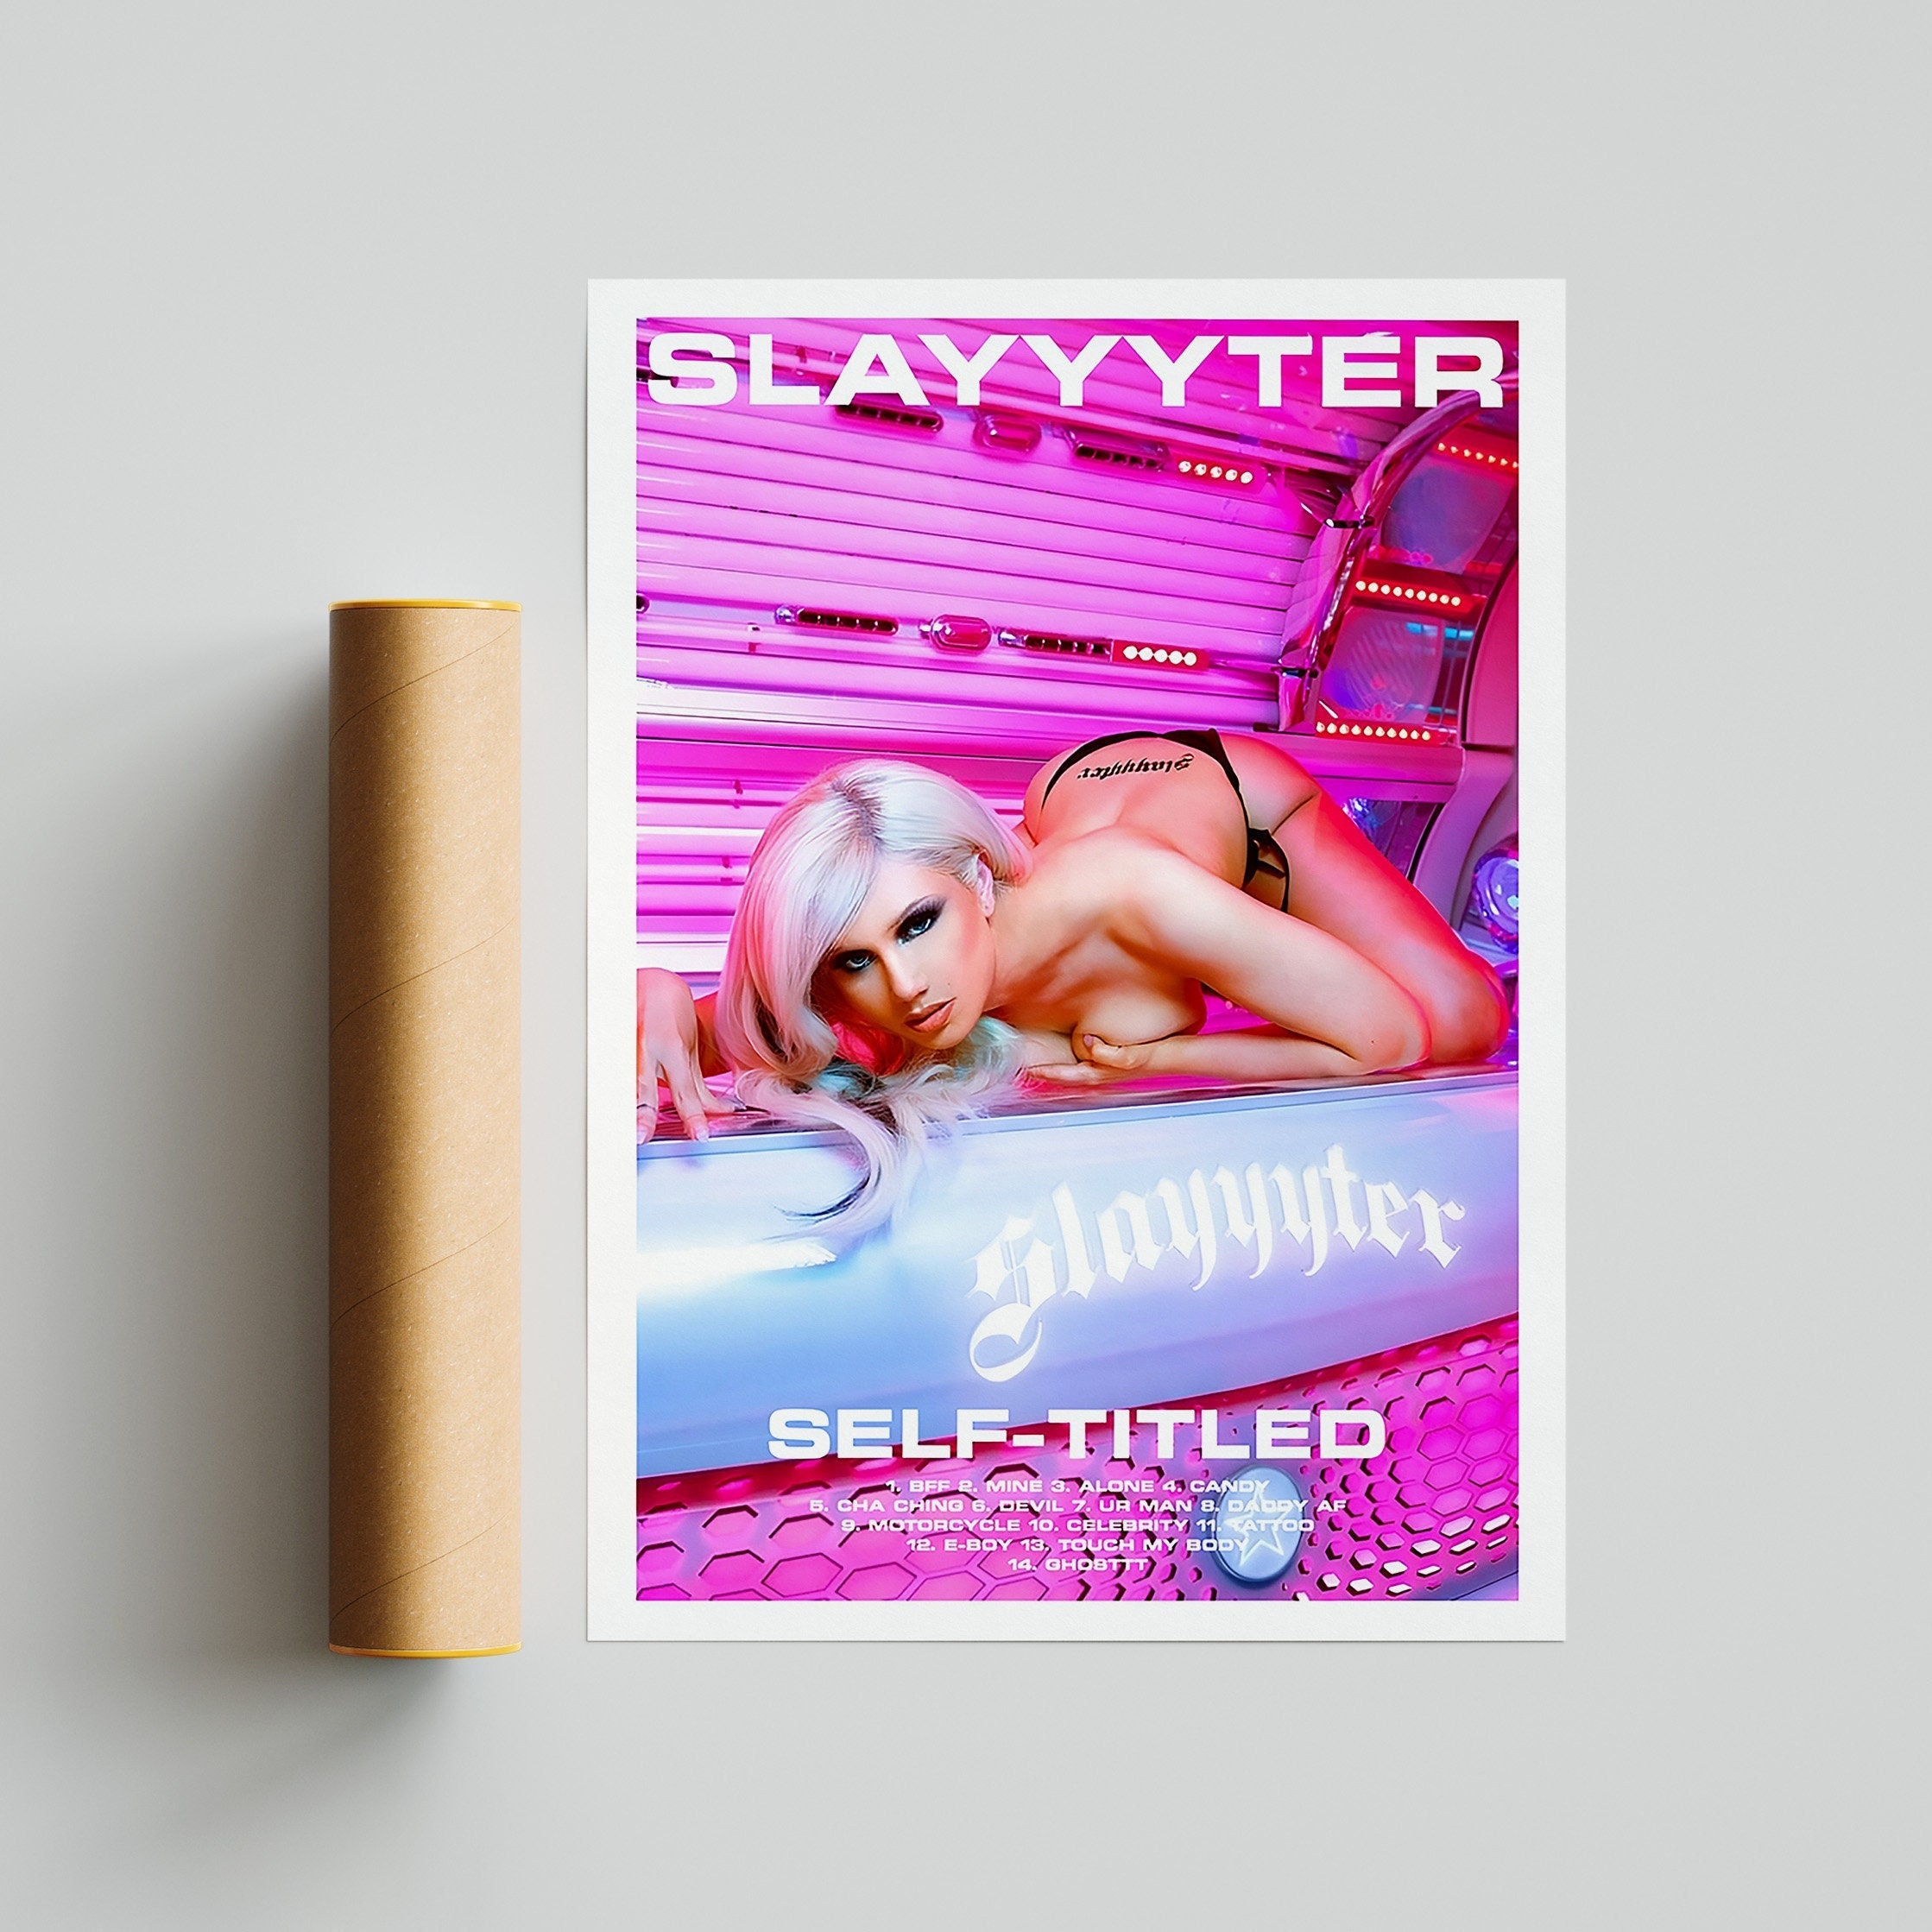 Slayyyter Self-titled Album Cover Poster Wall Art Home Decor 